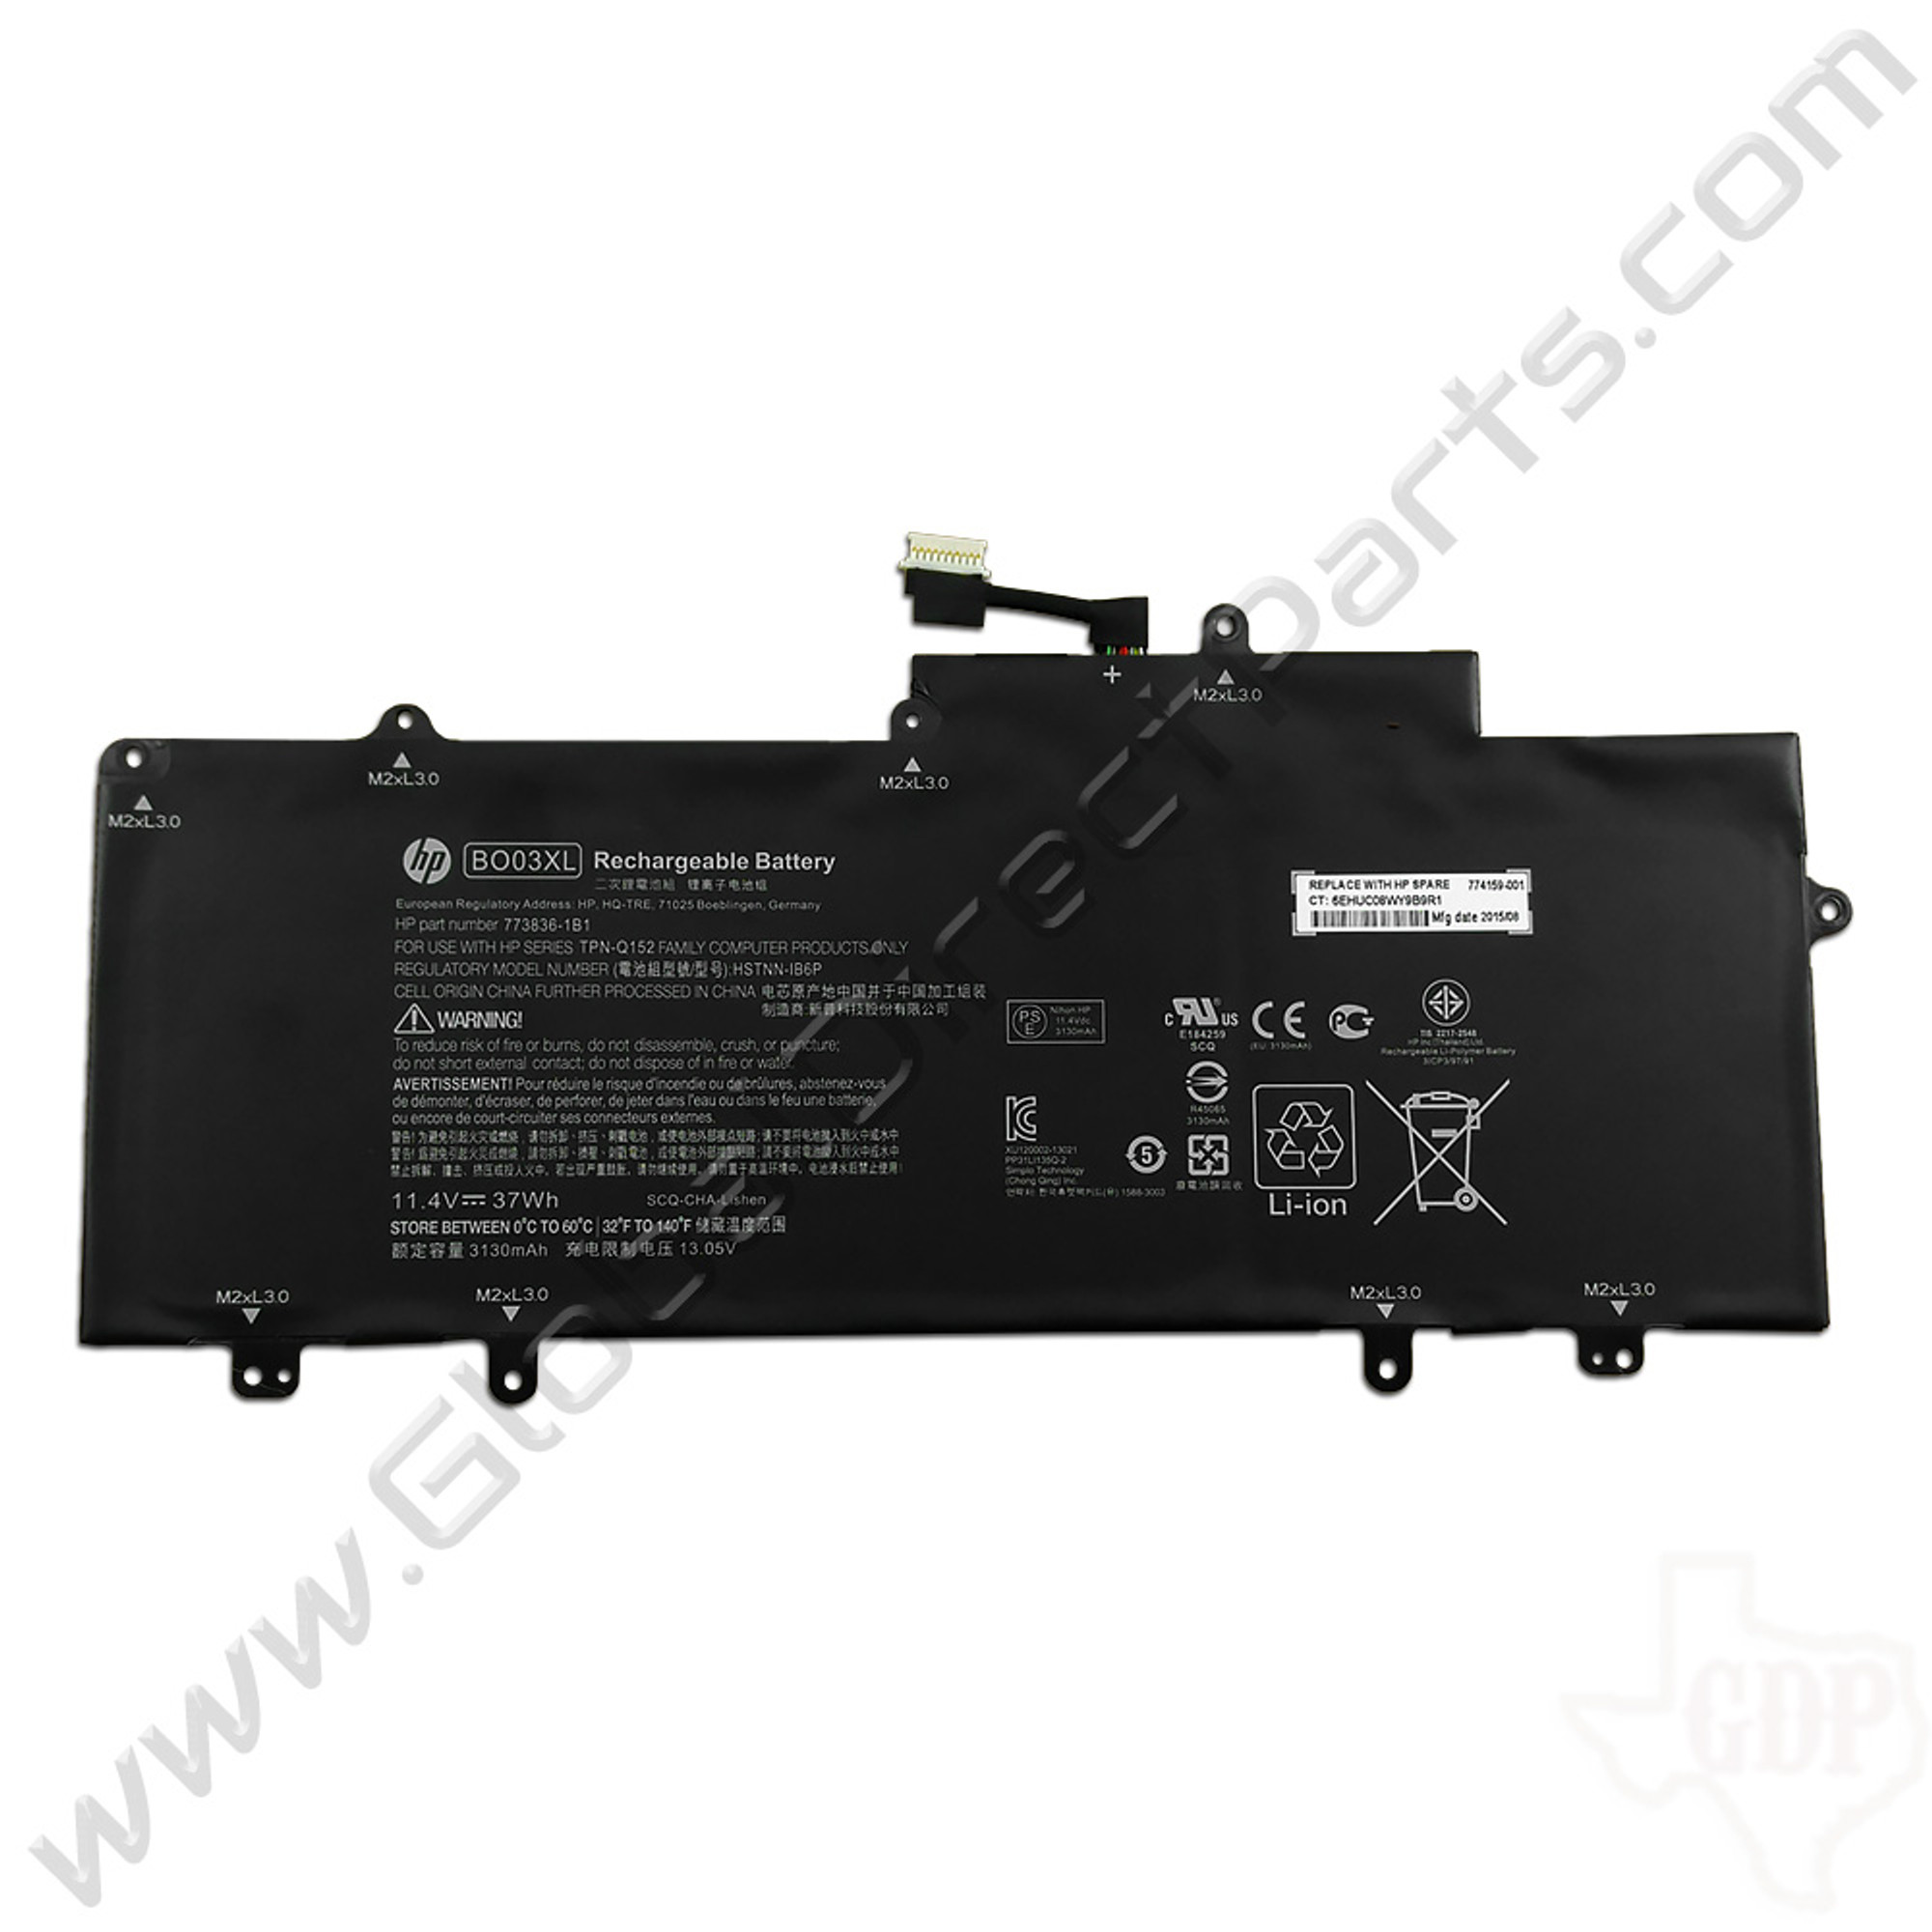 OEM HP Chromebook 14 G3 Battery [774159-001] - Global Direct Parts